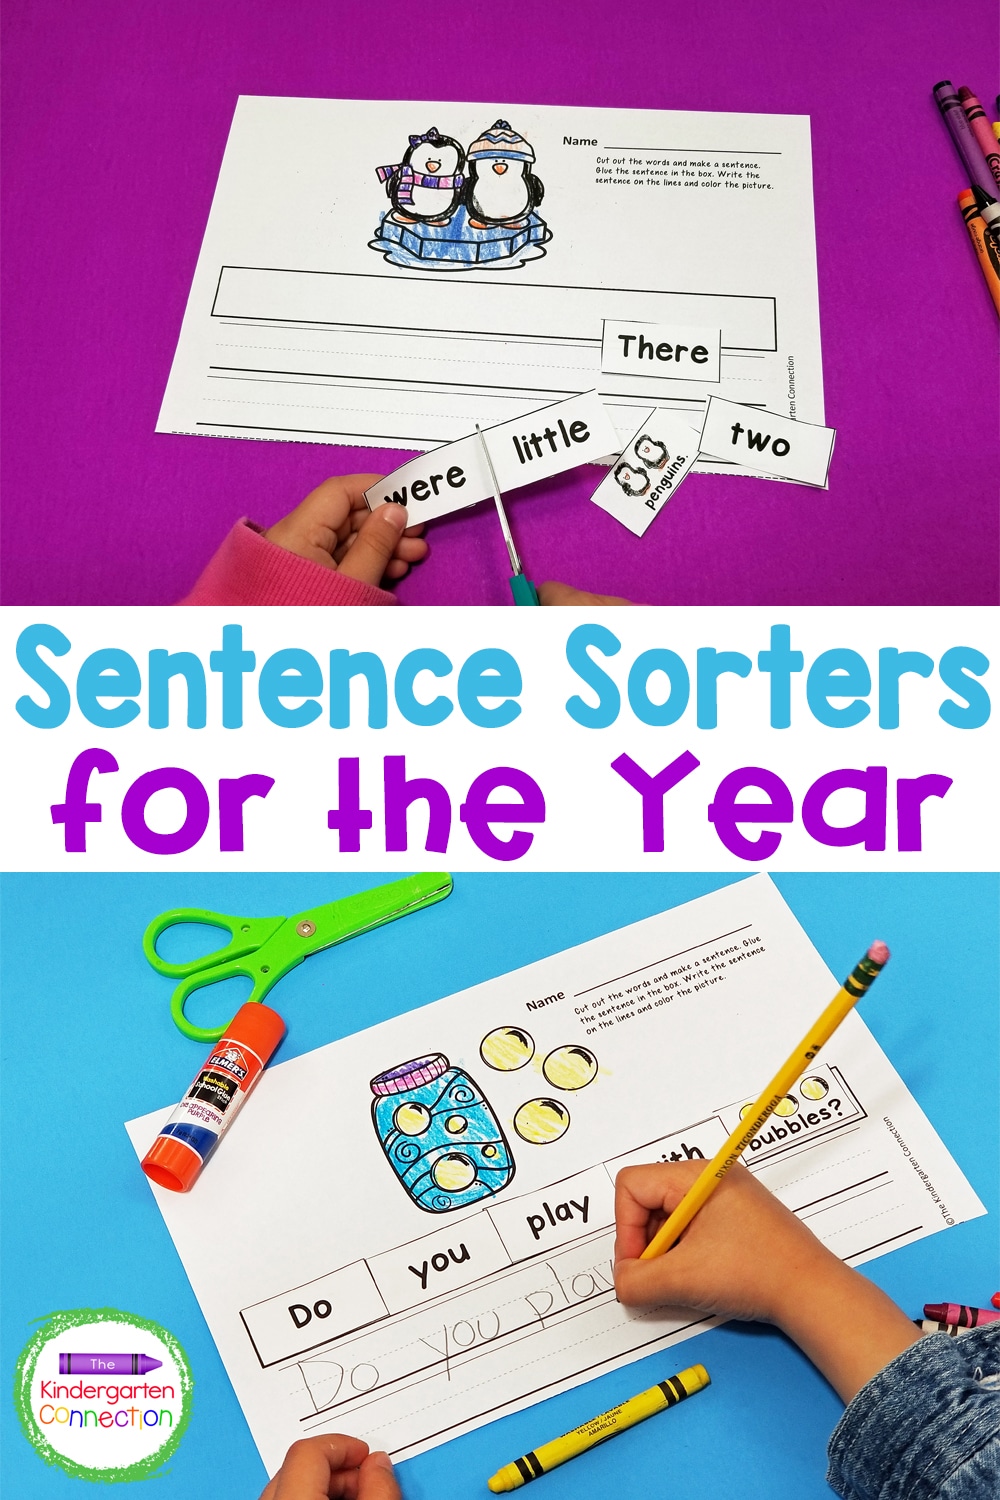 Build sight word fluency with these fun Sight Word Sentence Sorters for early learners. This bundle includes activities for the whole year!